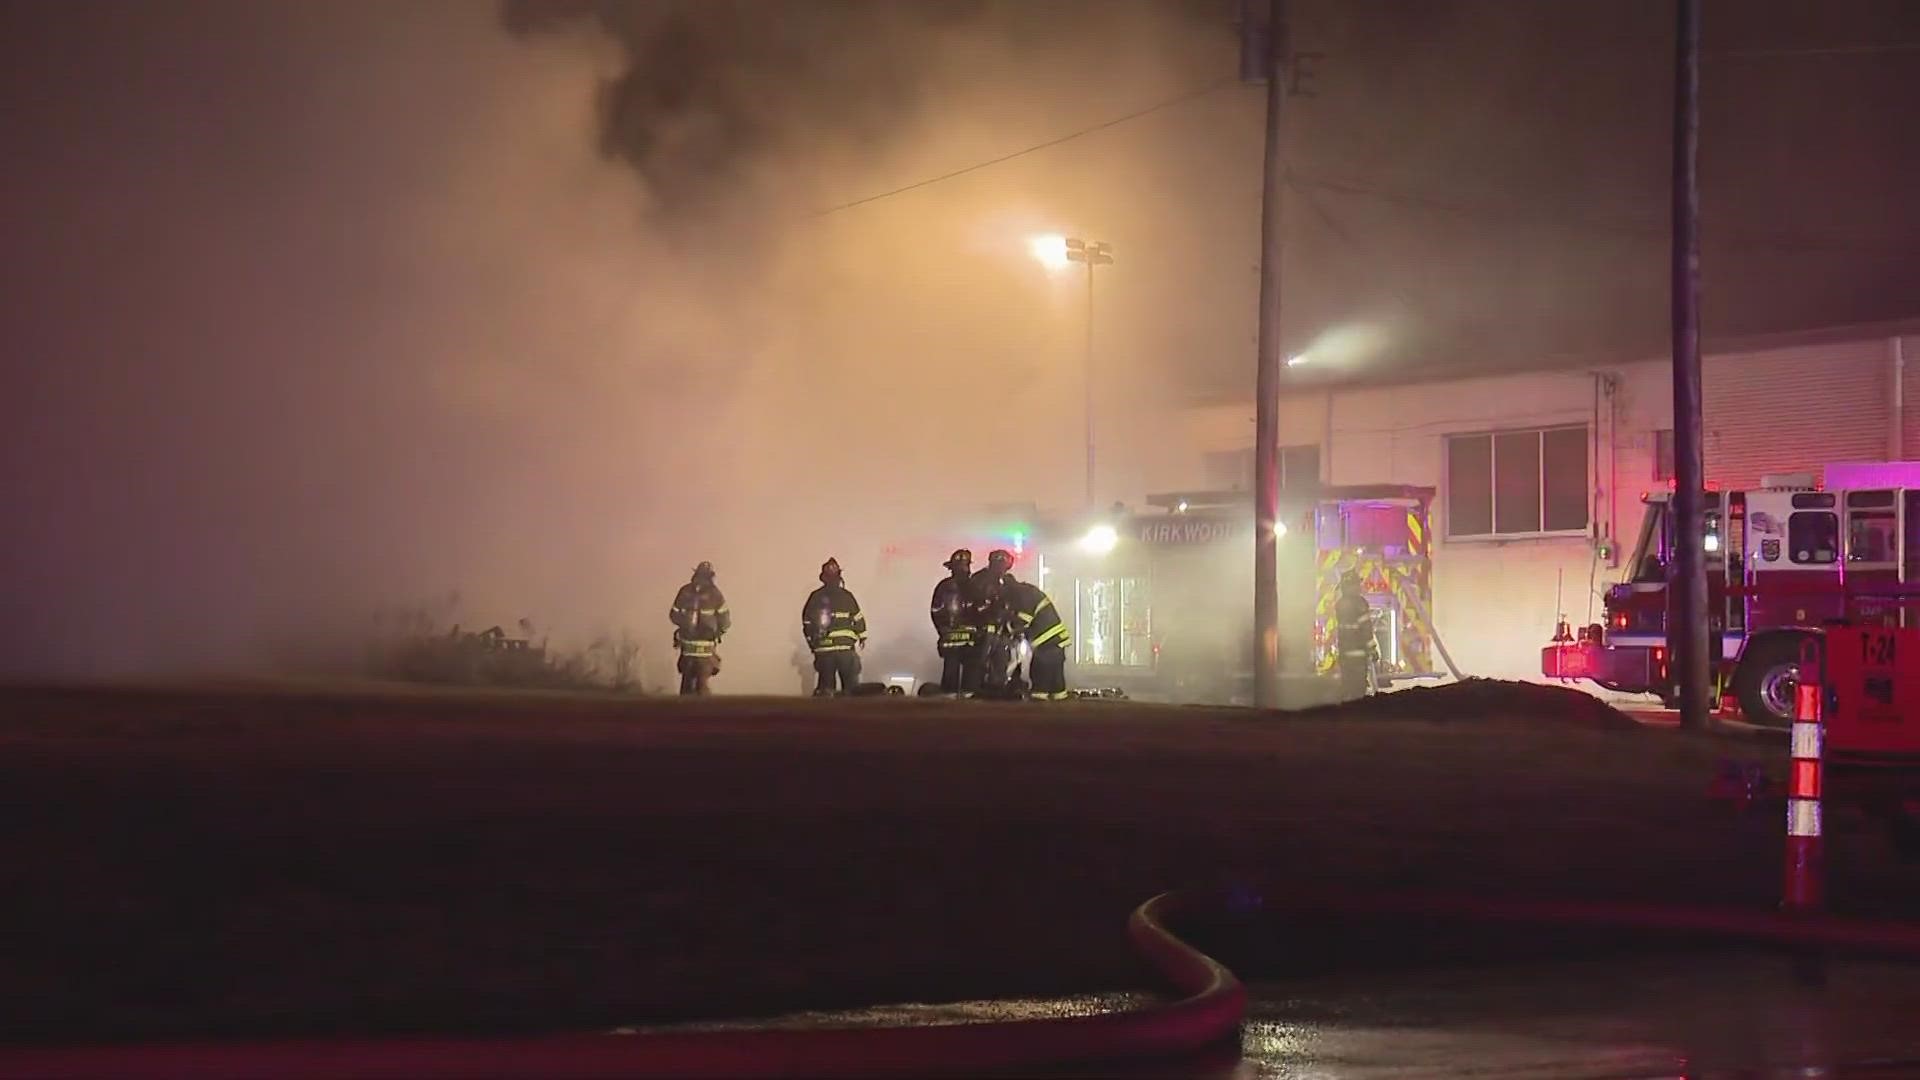 Firefighters said the fire broke out at about 3 a.m. in the back of the Dale Printing Co. building.